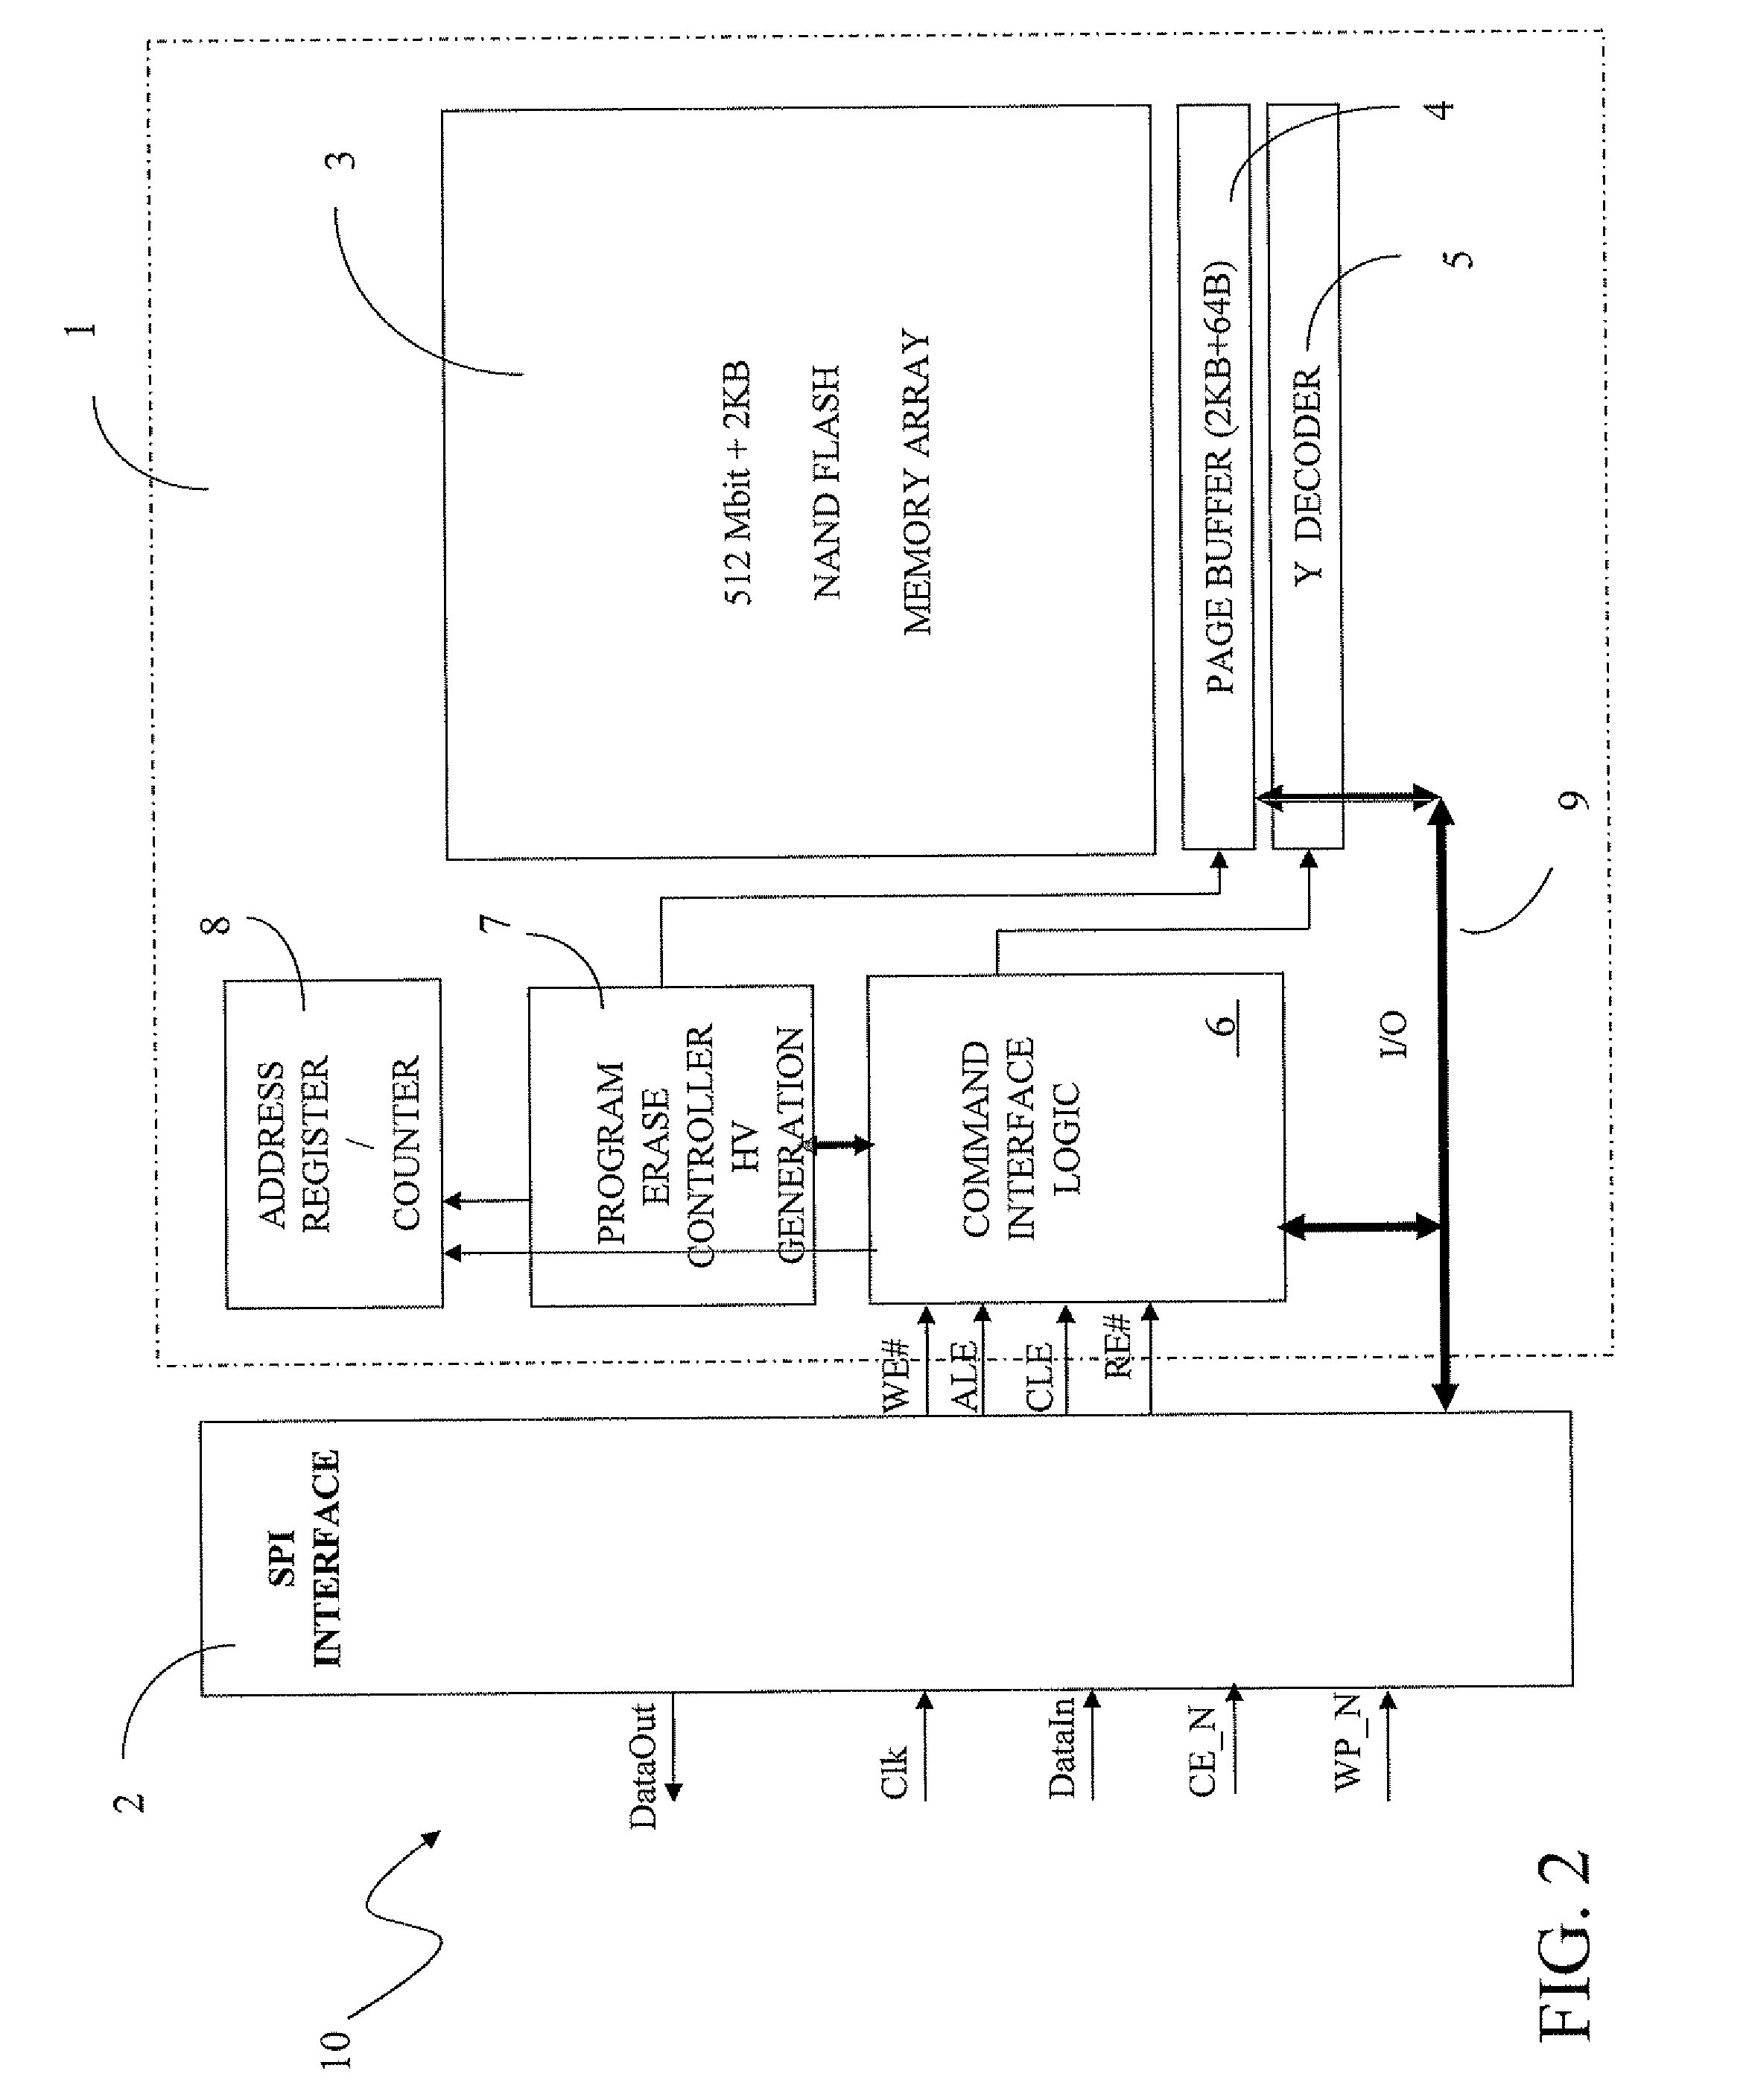 Memory architecture with serial peripheral interface